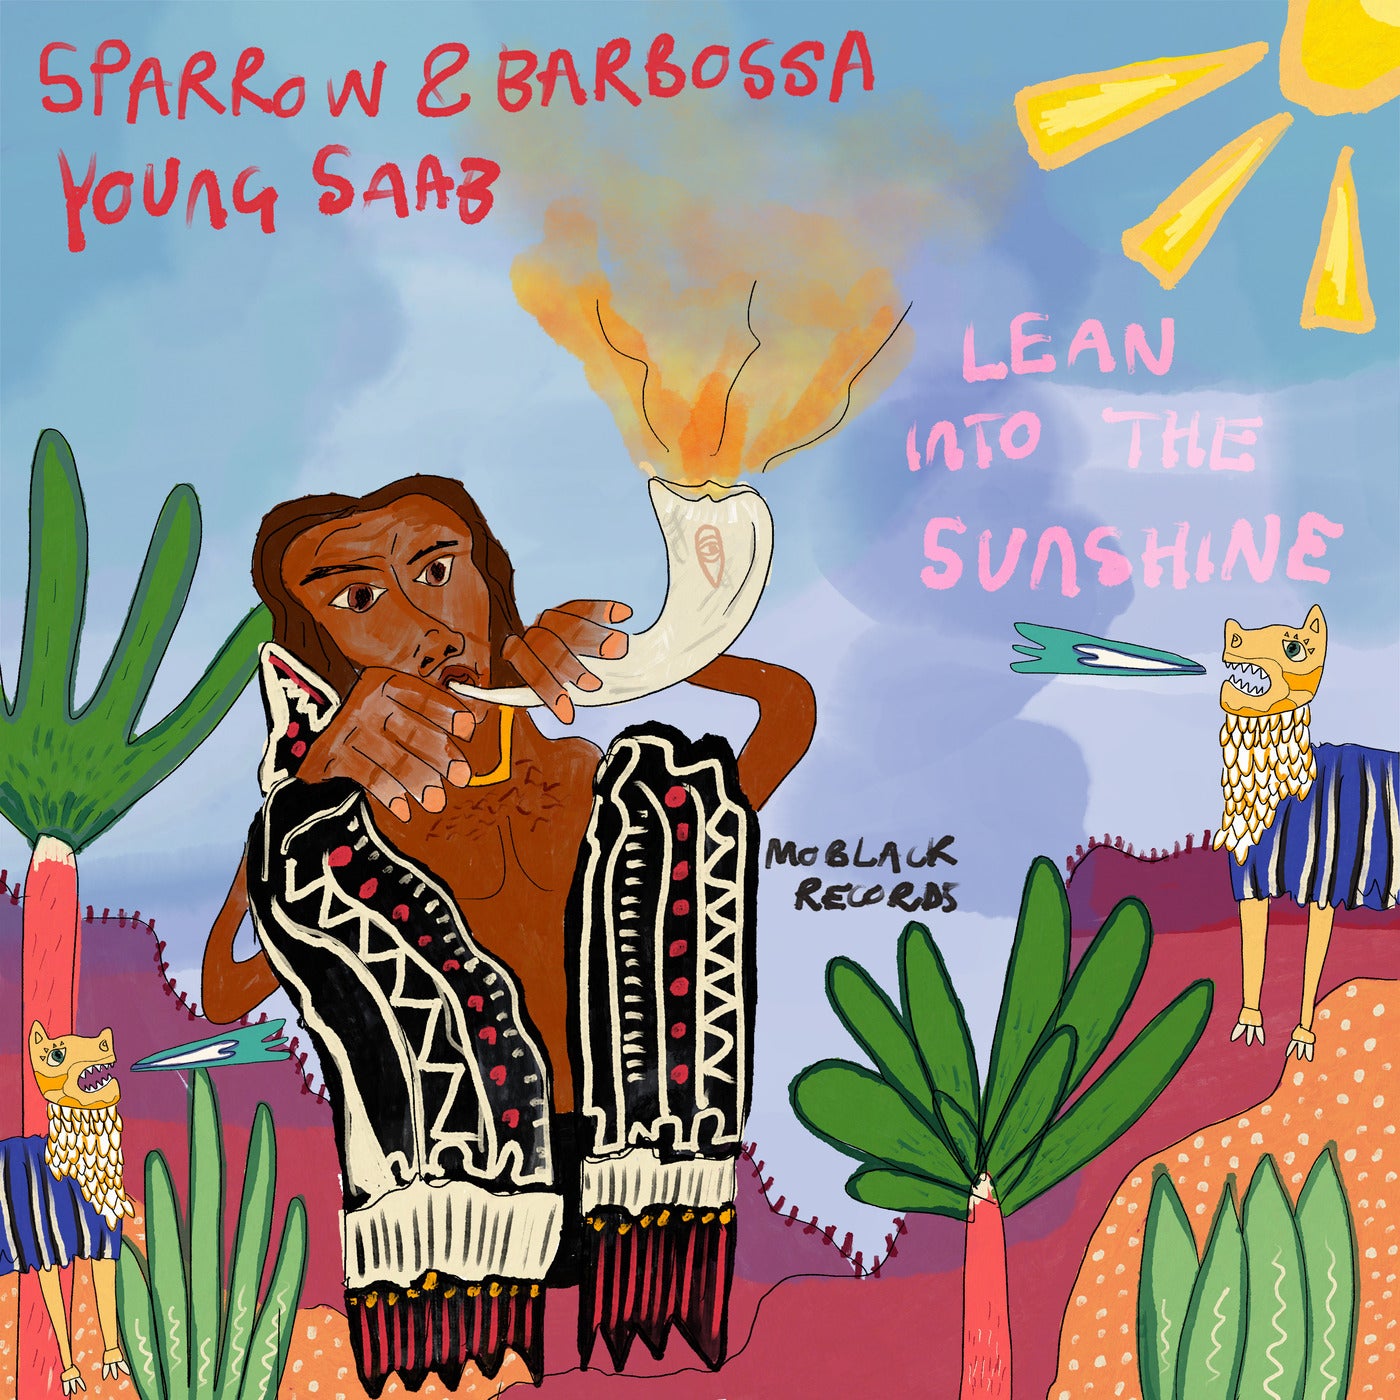 image cover: Sparrow & Barbossa, Young Saab - Lean Into The Sunshine on MoBlack Records